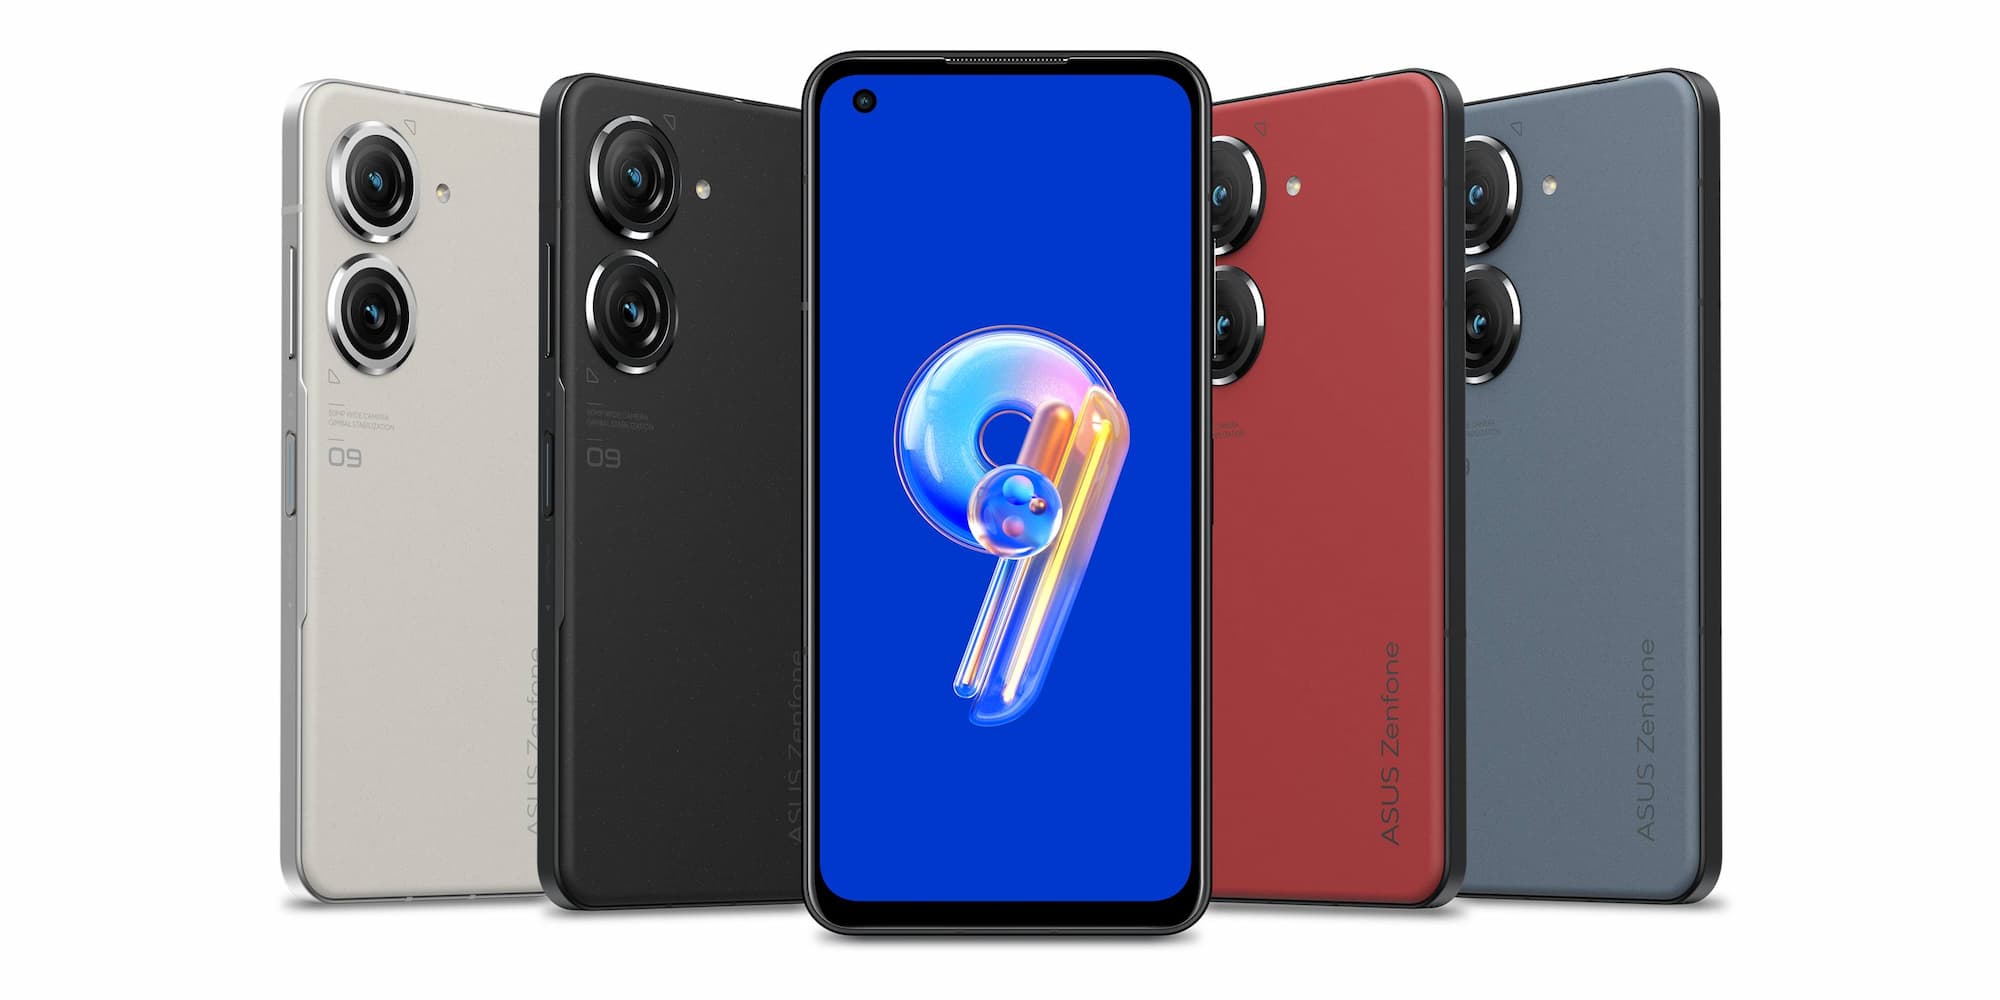 Asus Zenfone 9 goes official for €799 - 9to5Google